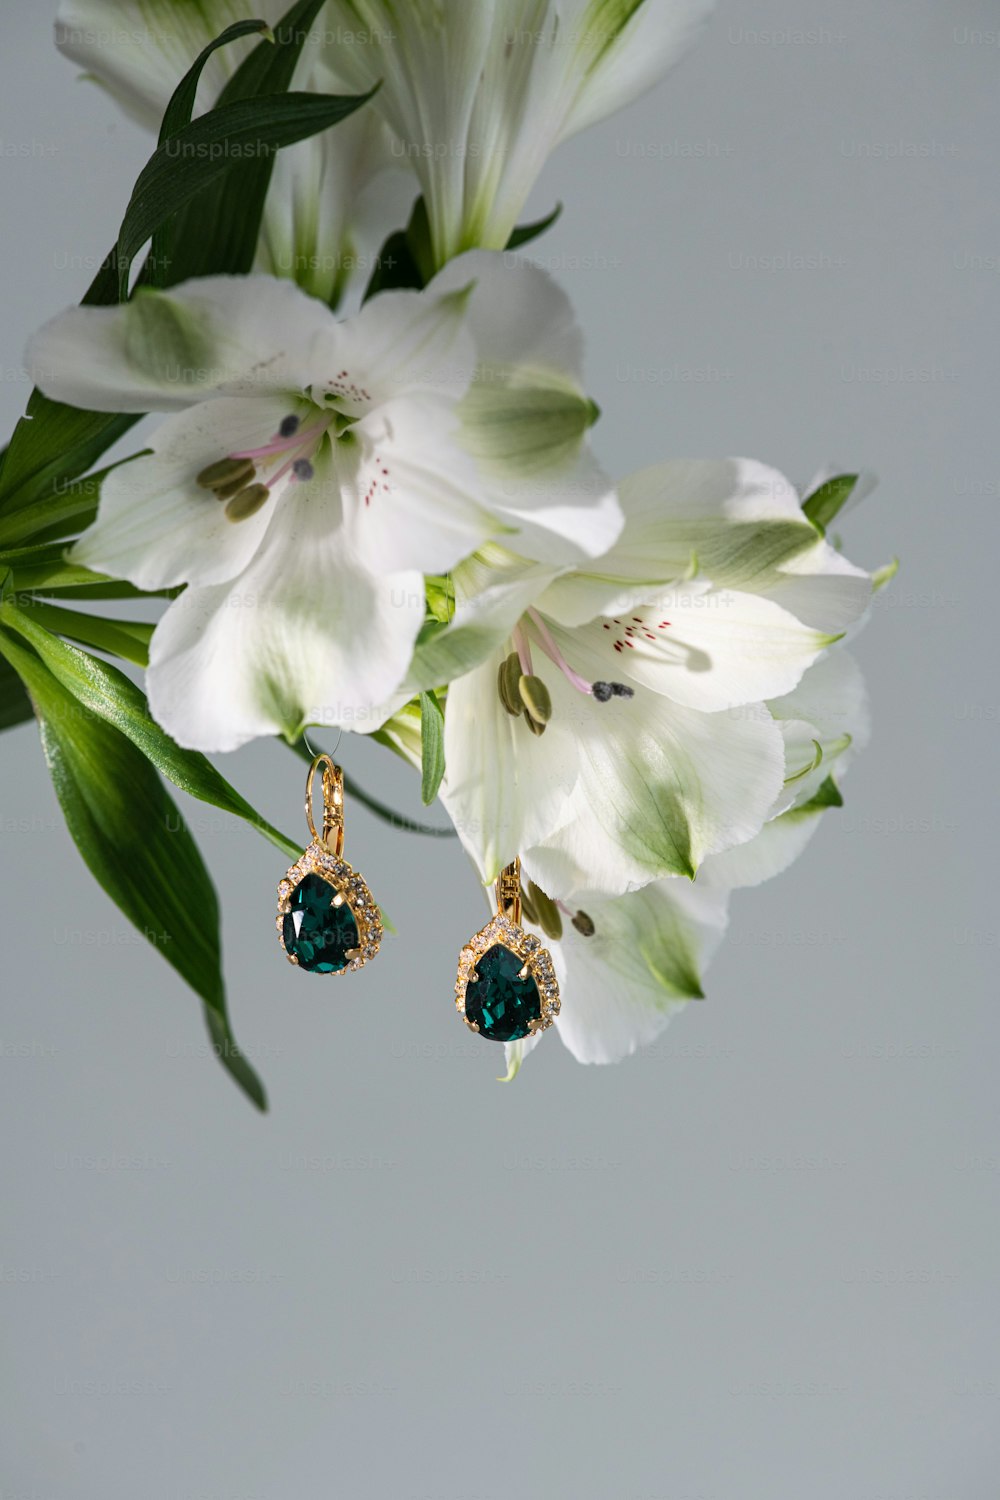 a pair of earrings sitting on top of a flower